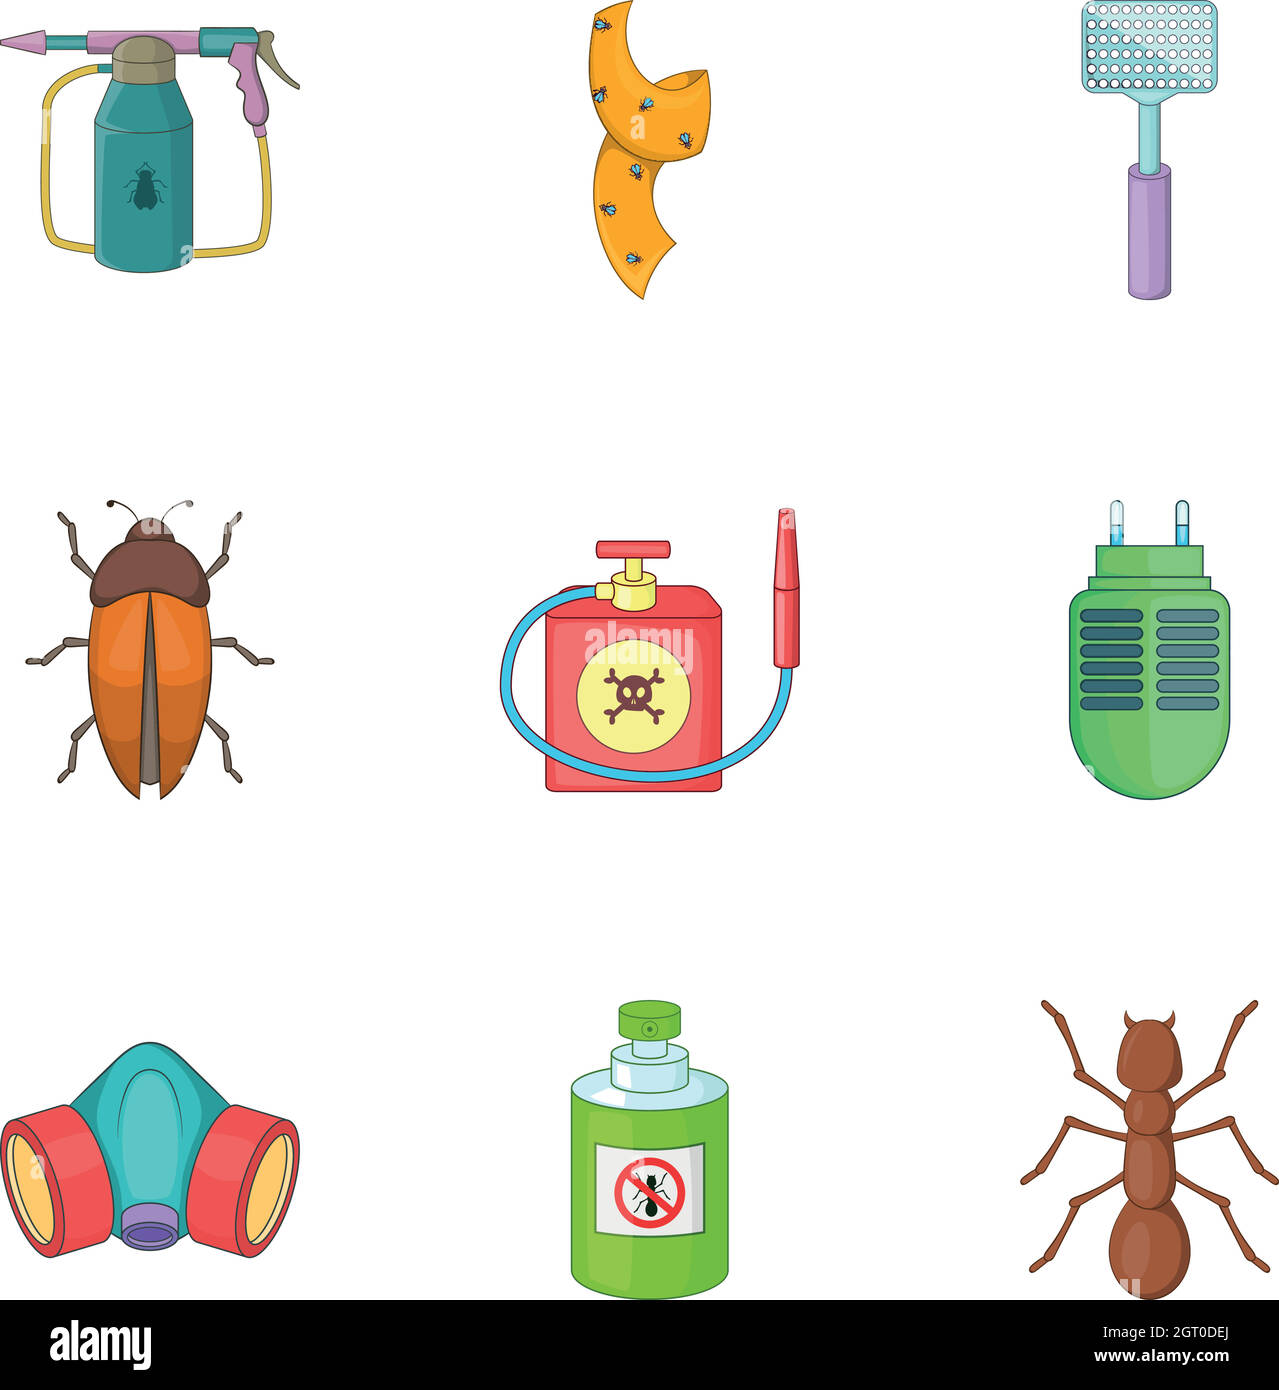 No insects icons set, cartoon style Stock Vector